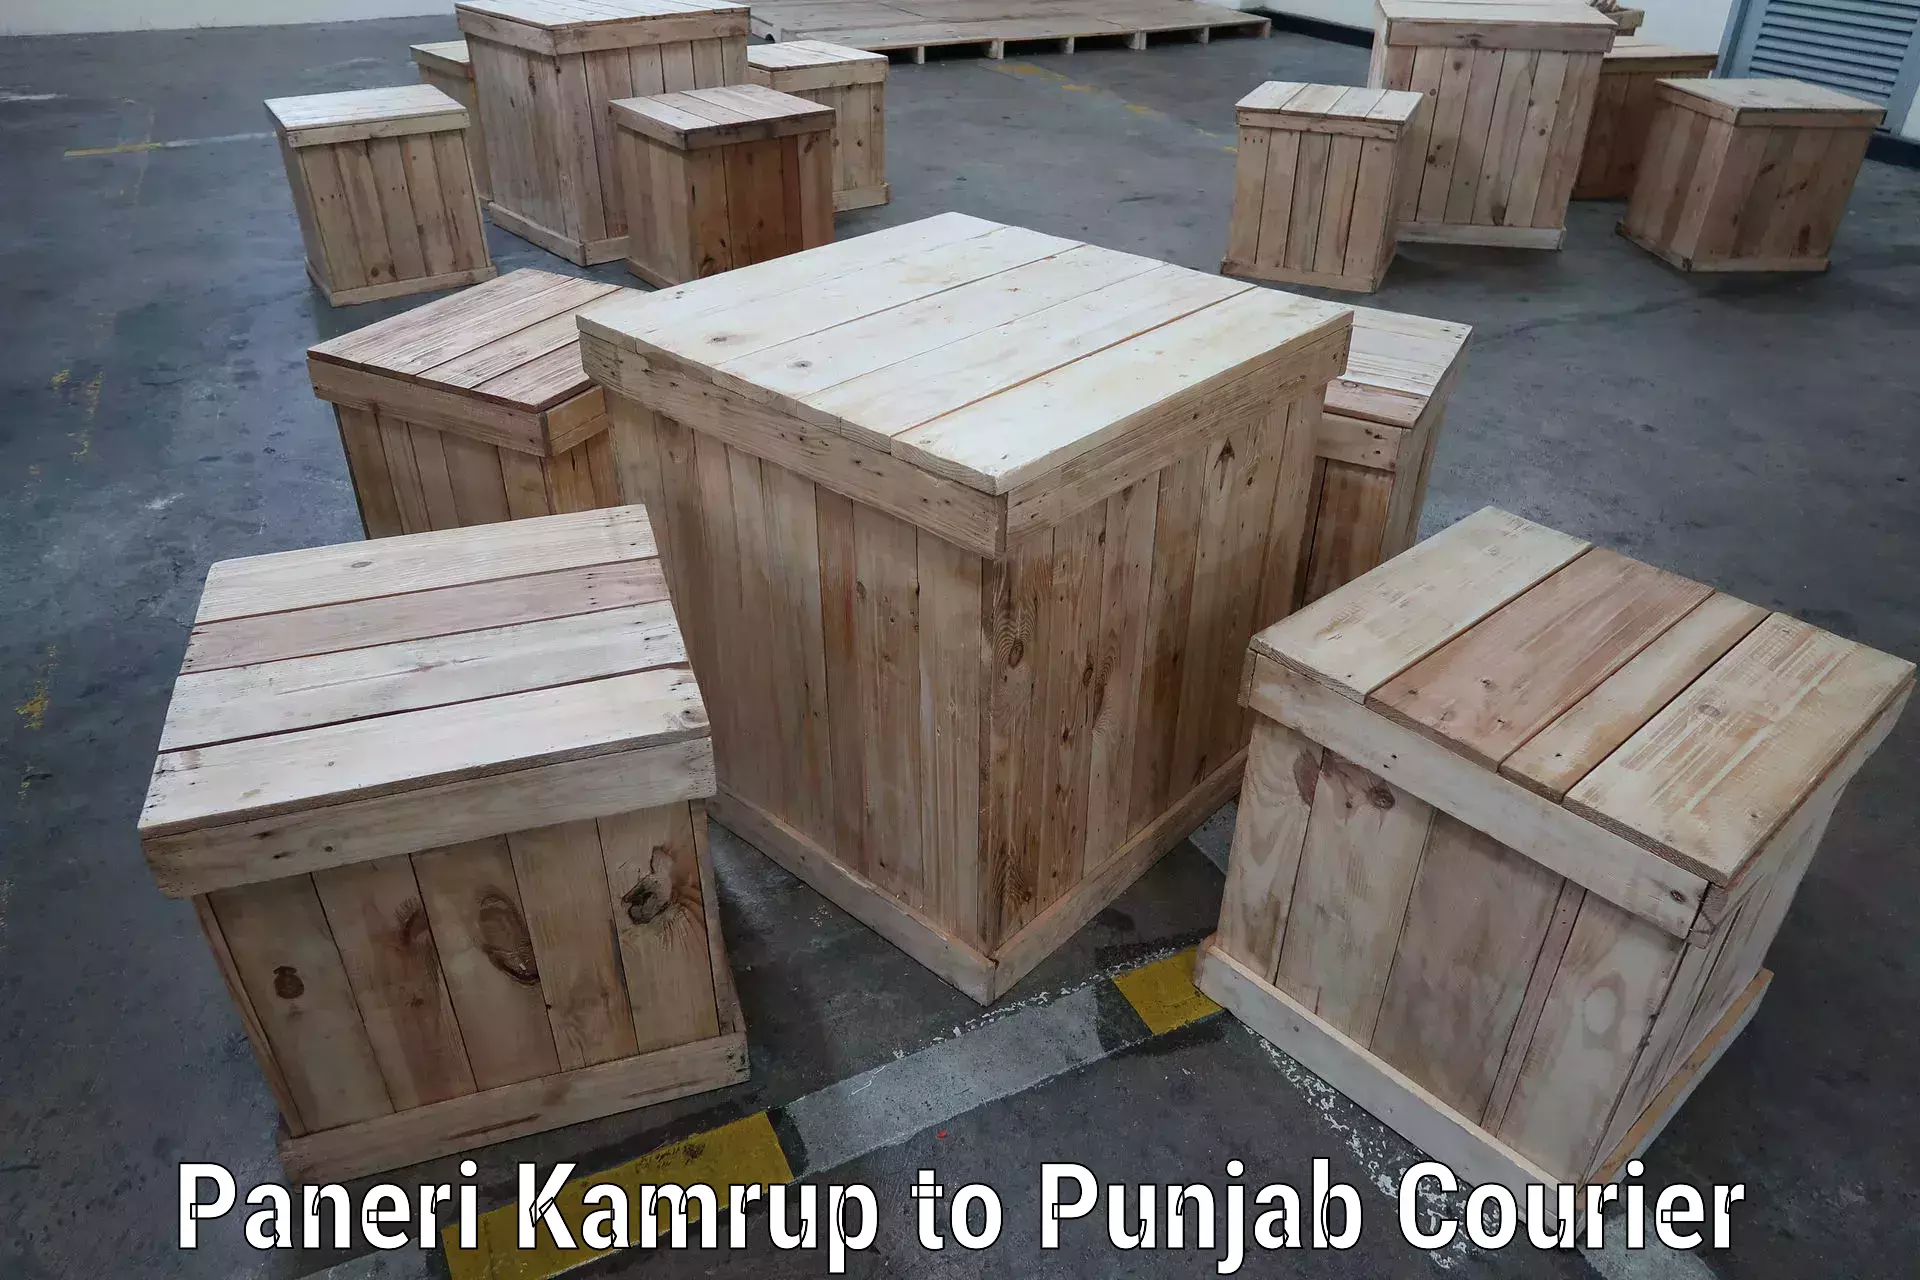 International courier networks Paneri Kamrup to Mohali